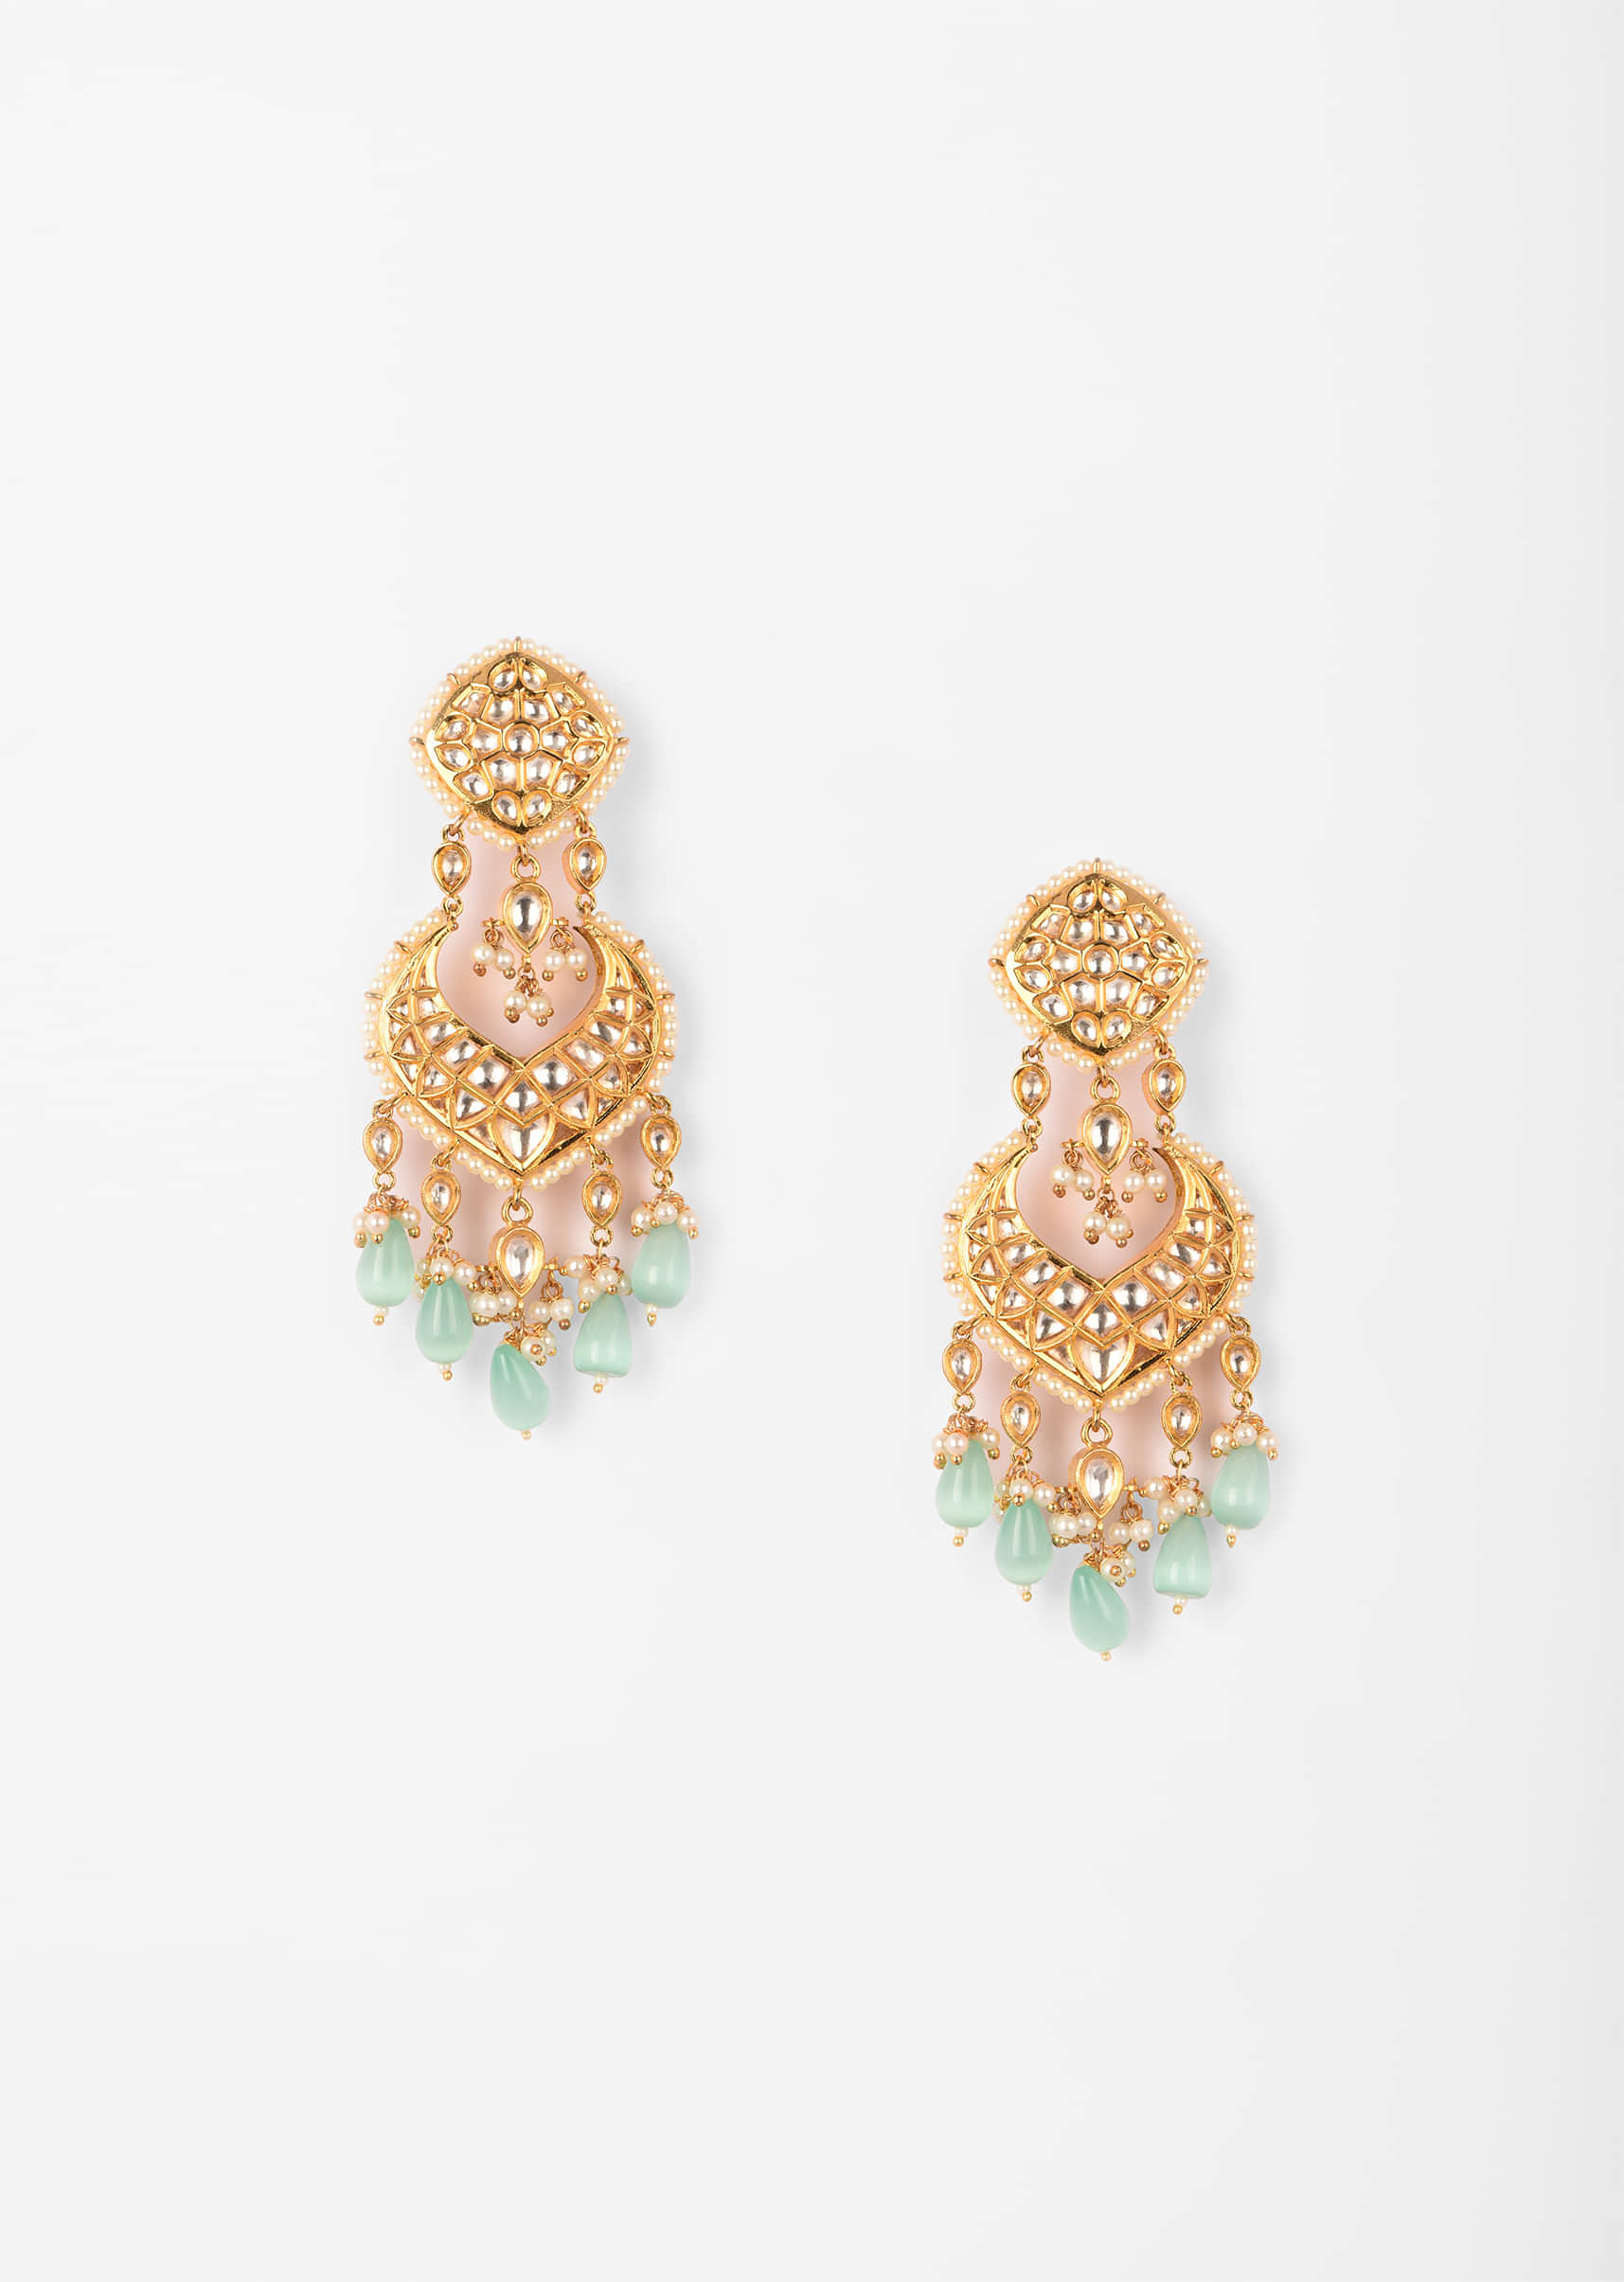 Gold Kundan Earrings With Dangling Pearl And Green Bead Fringes 